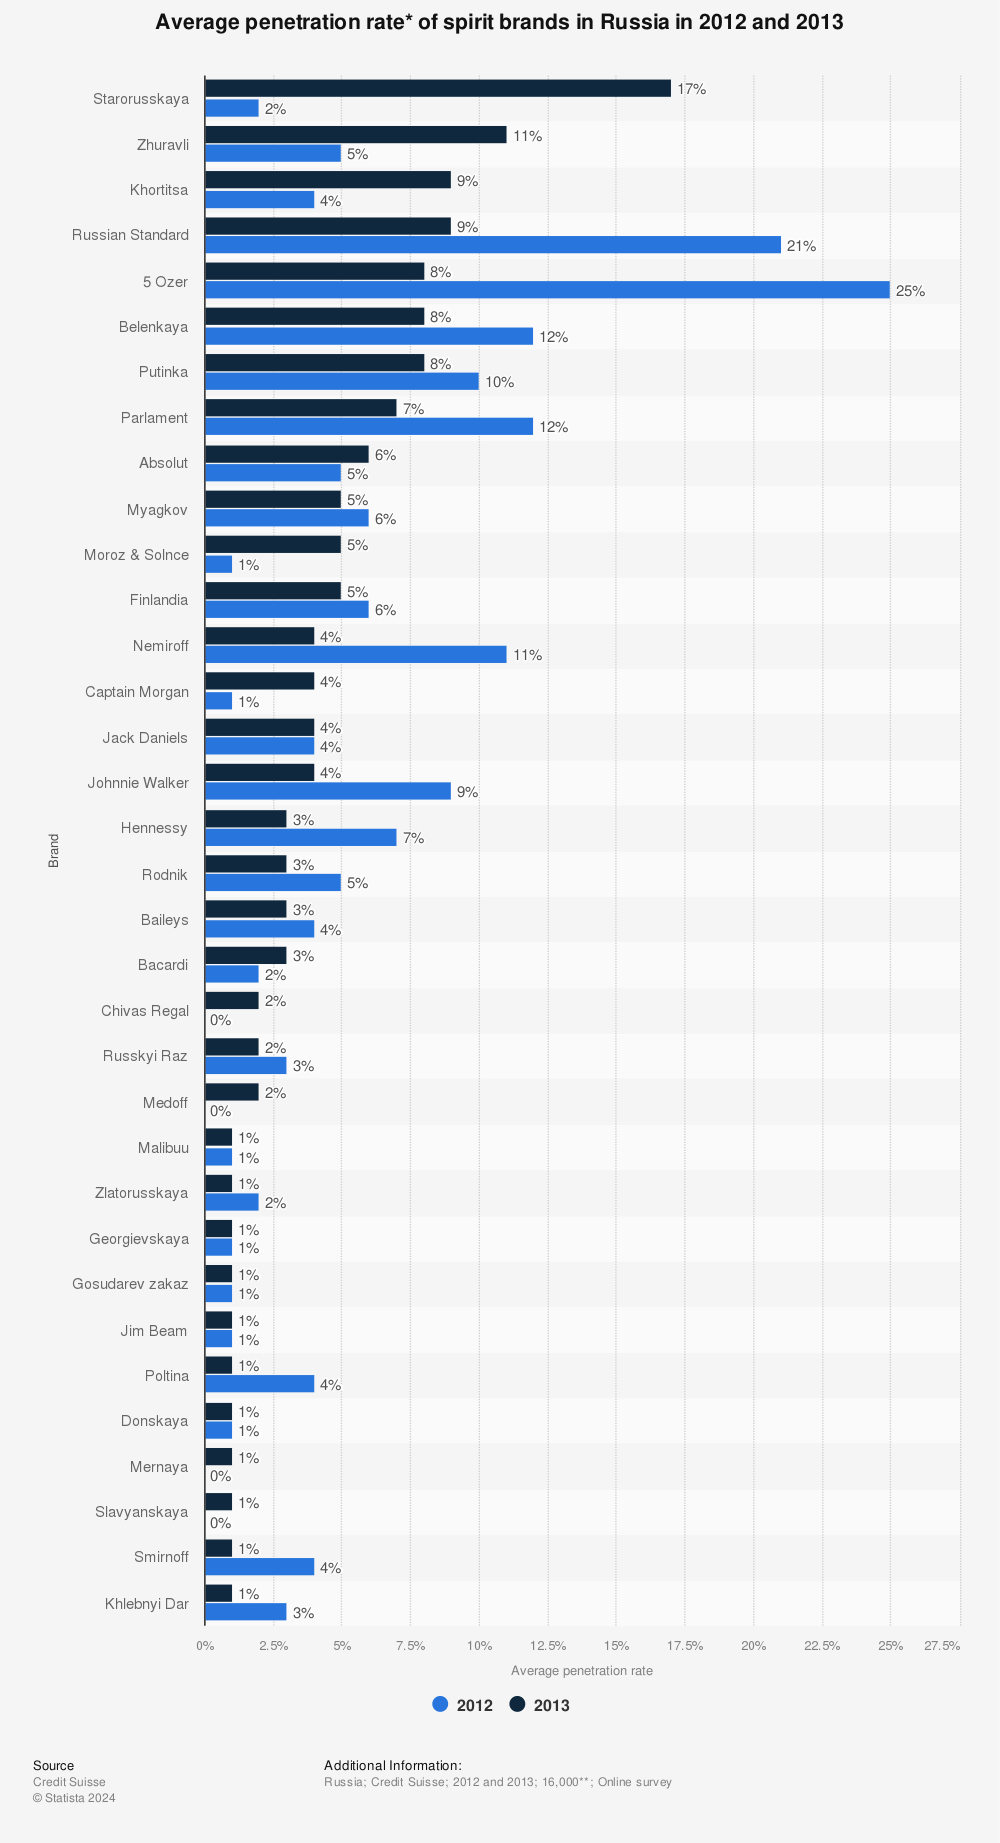 Statistic: Average penetration rate* of spirit brands in Russia in 2012 and 2013 | Statista